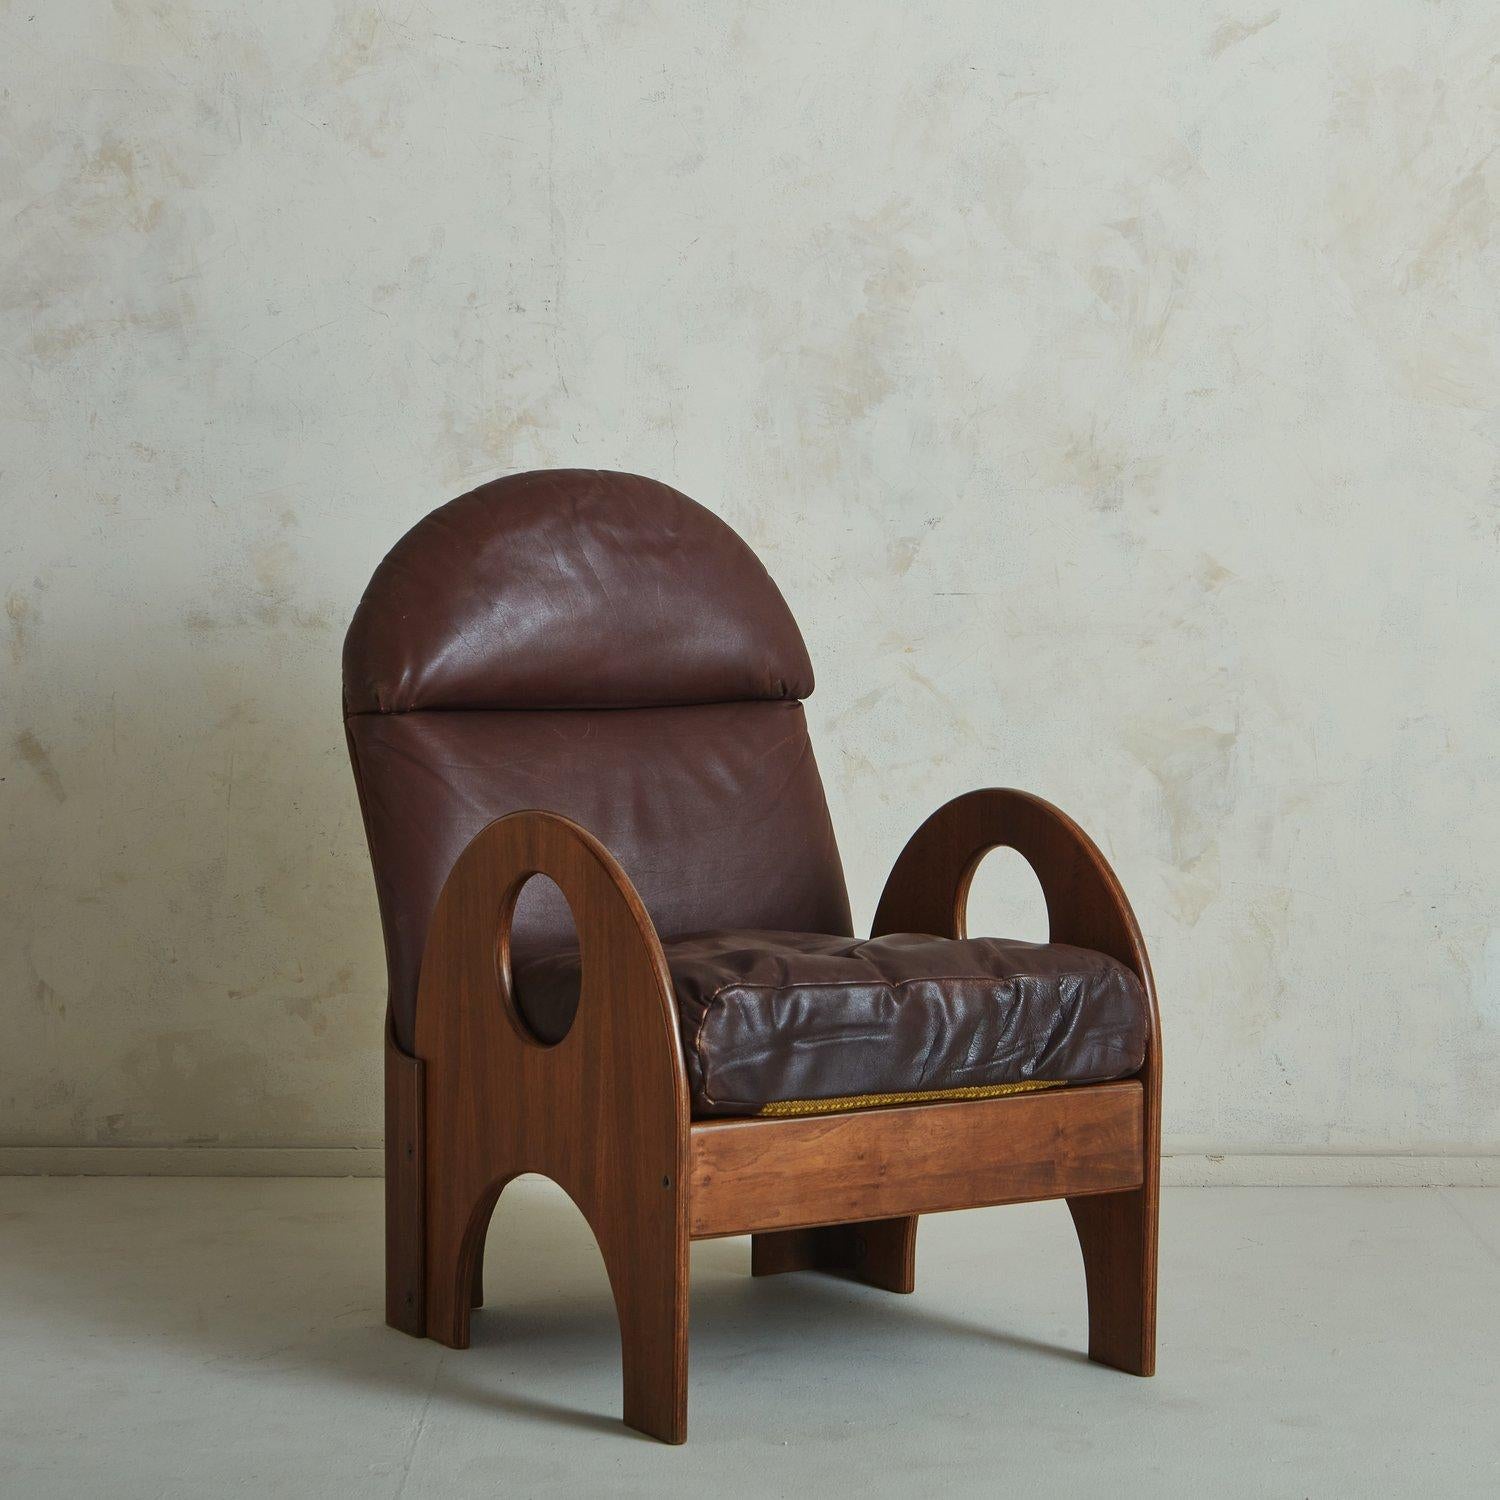 Mid-20th Century Walnut + Leather 'Arcata' Chair by Gae Aulenti for Poltronova, Italy 1968 For Sale